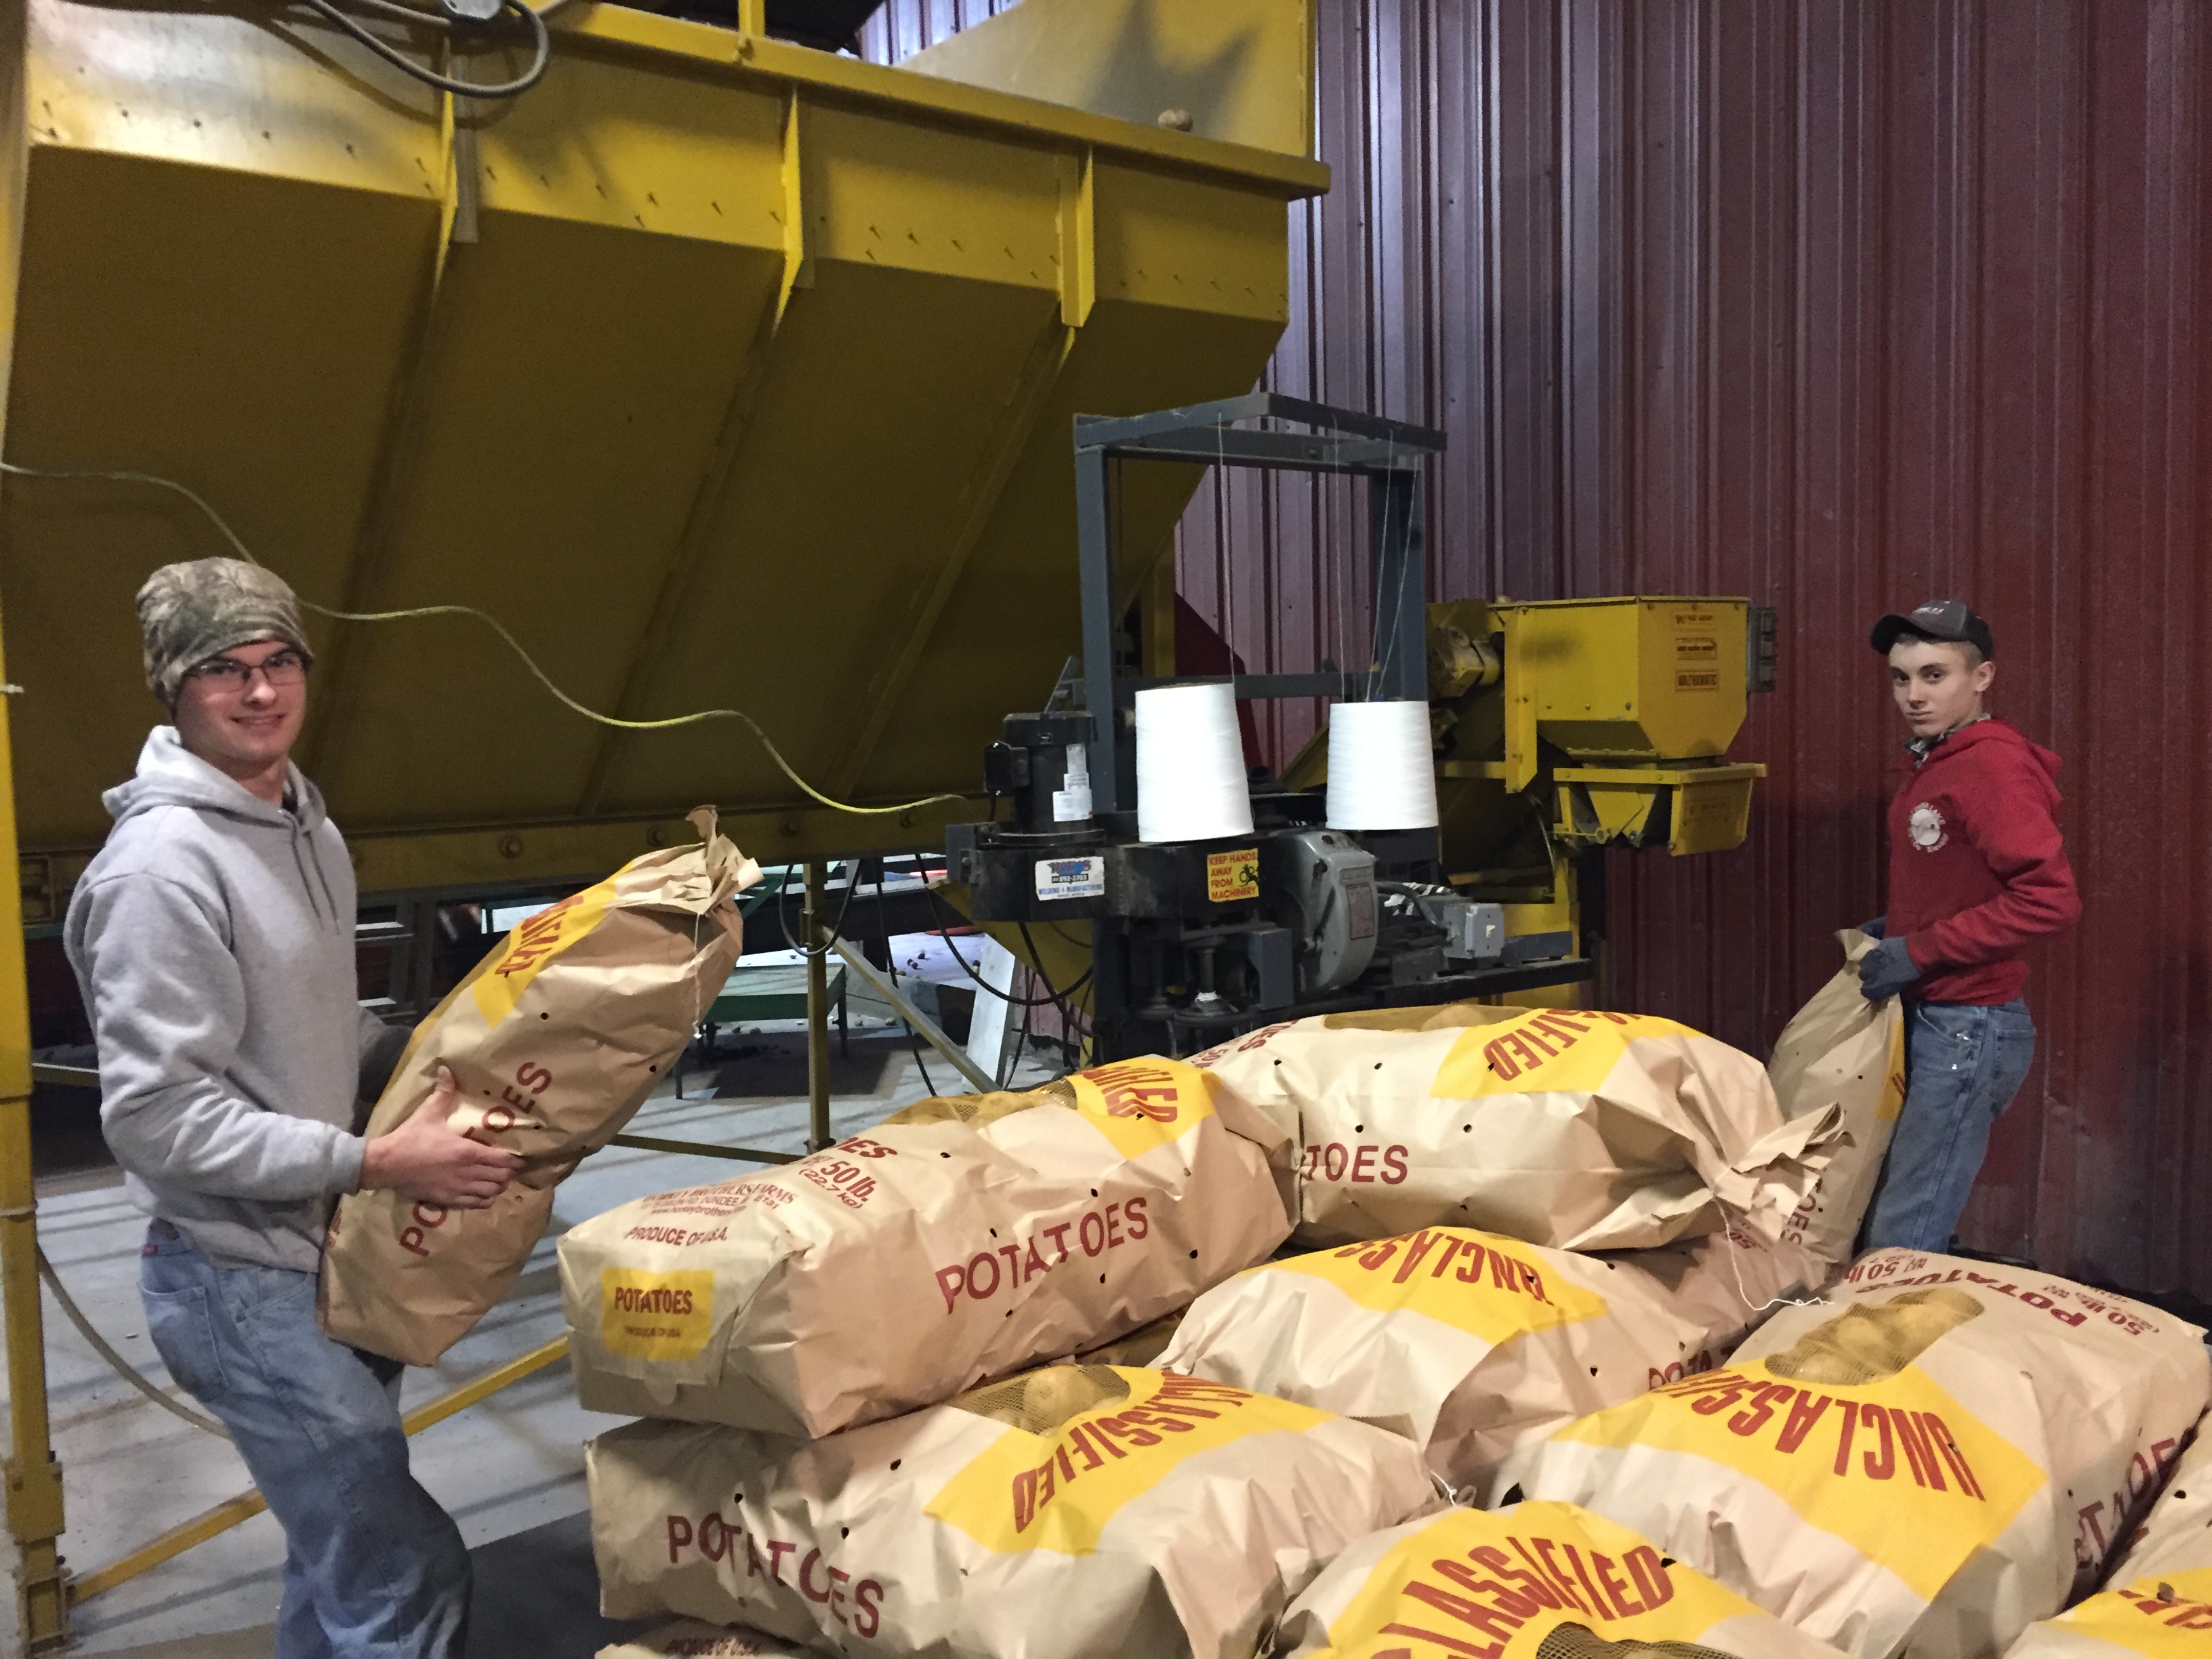 Workers loading potato bags